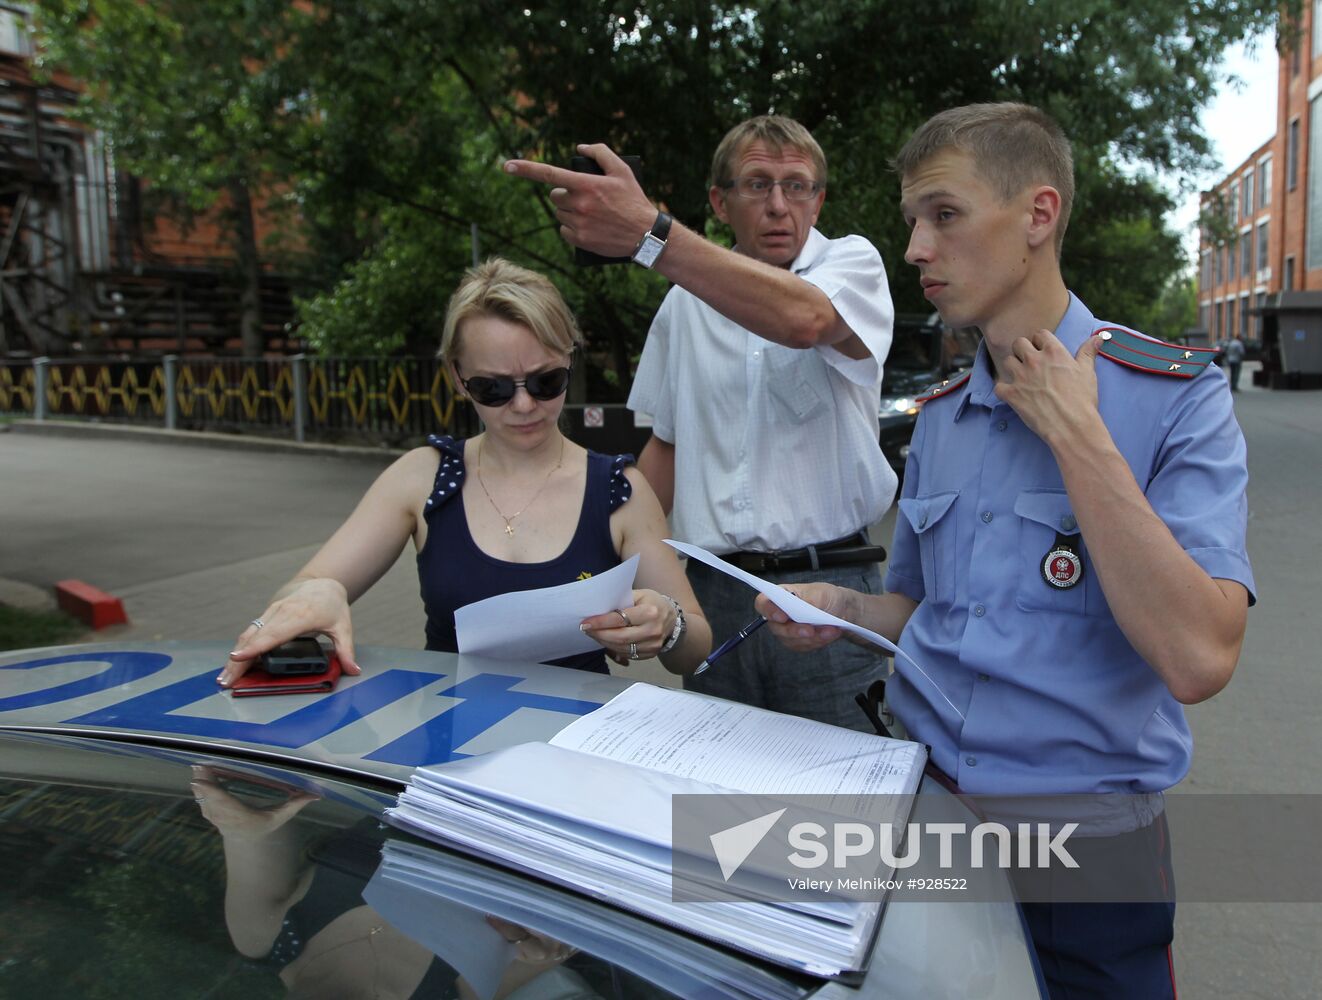 Traffic police of Moscow's Eastern Administrative District